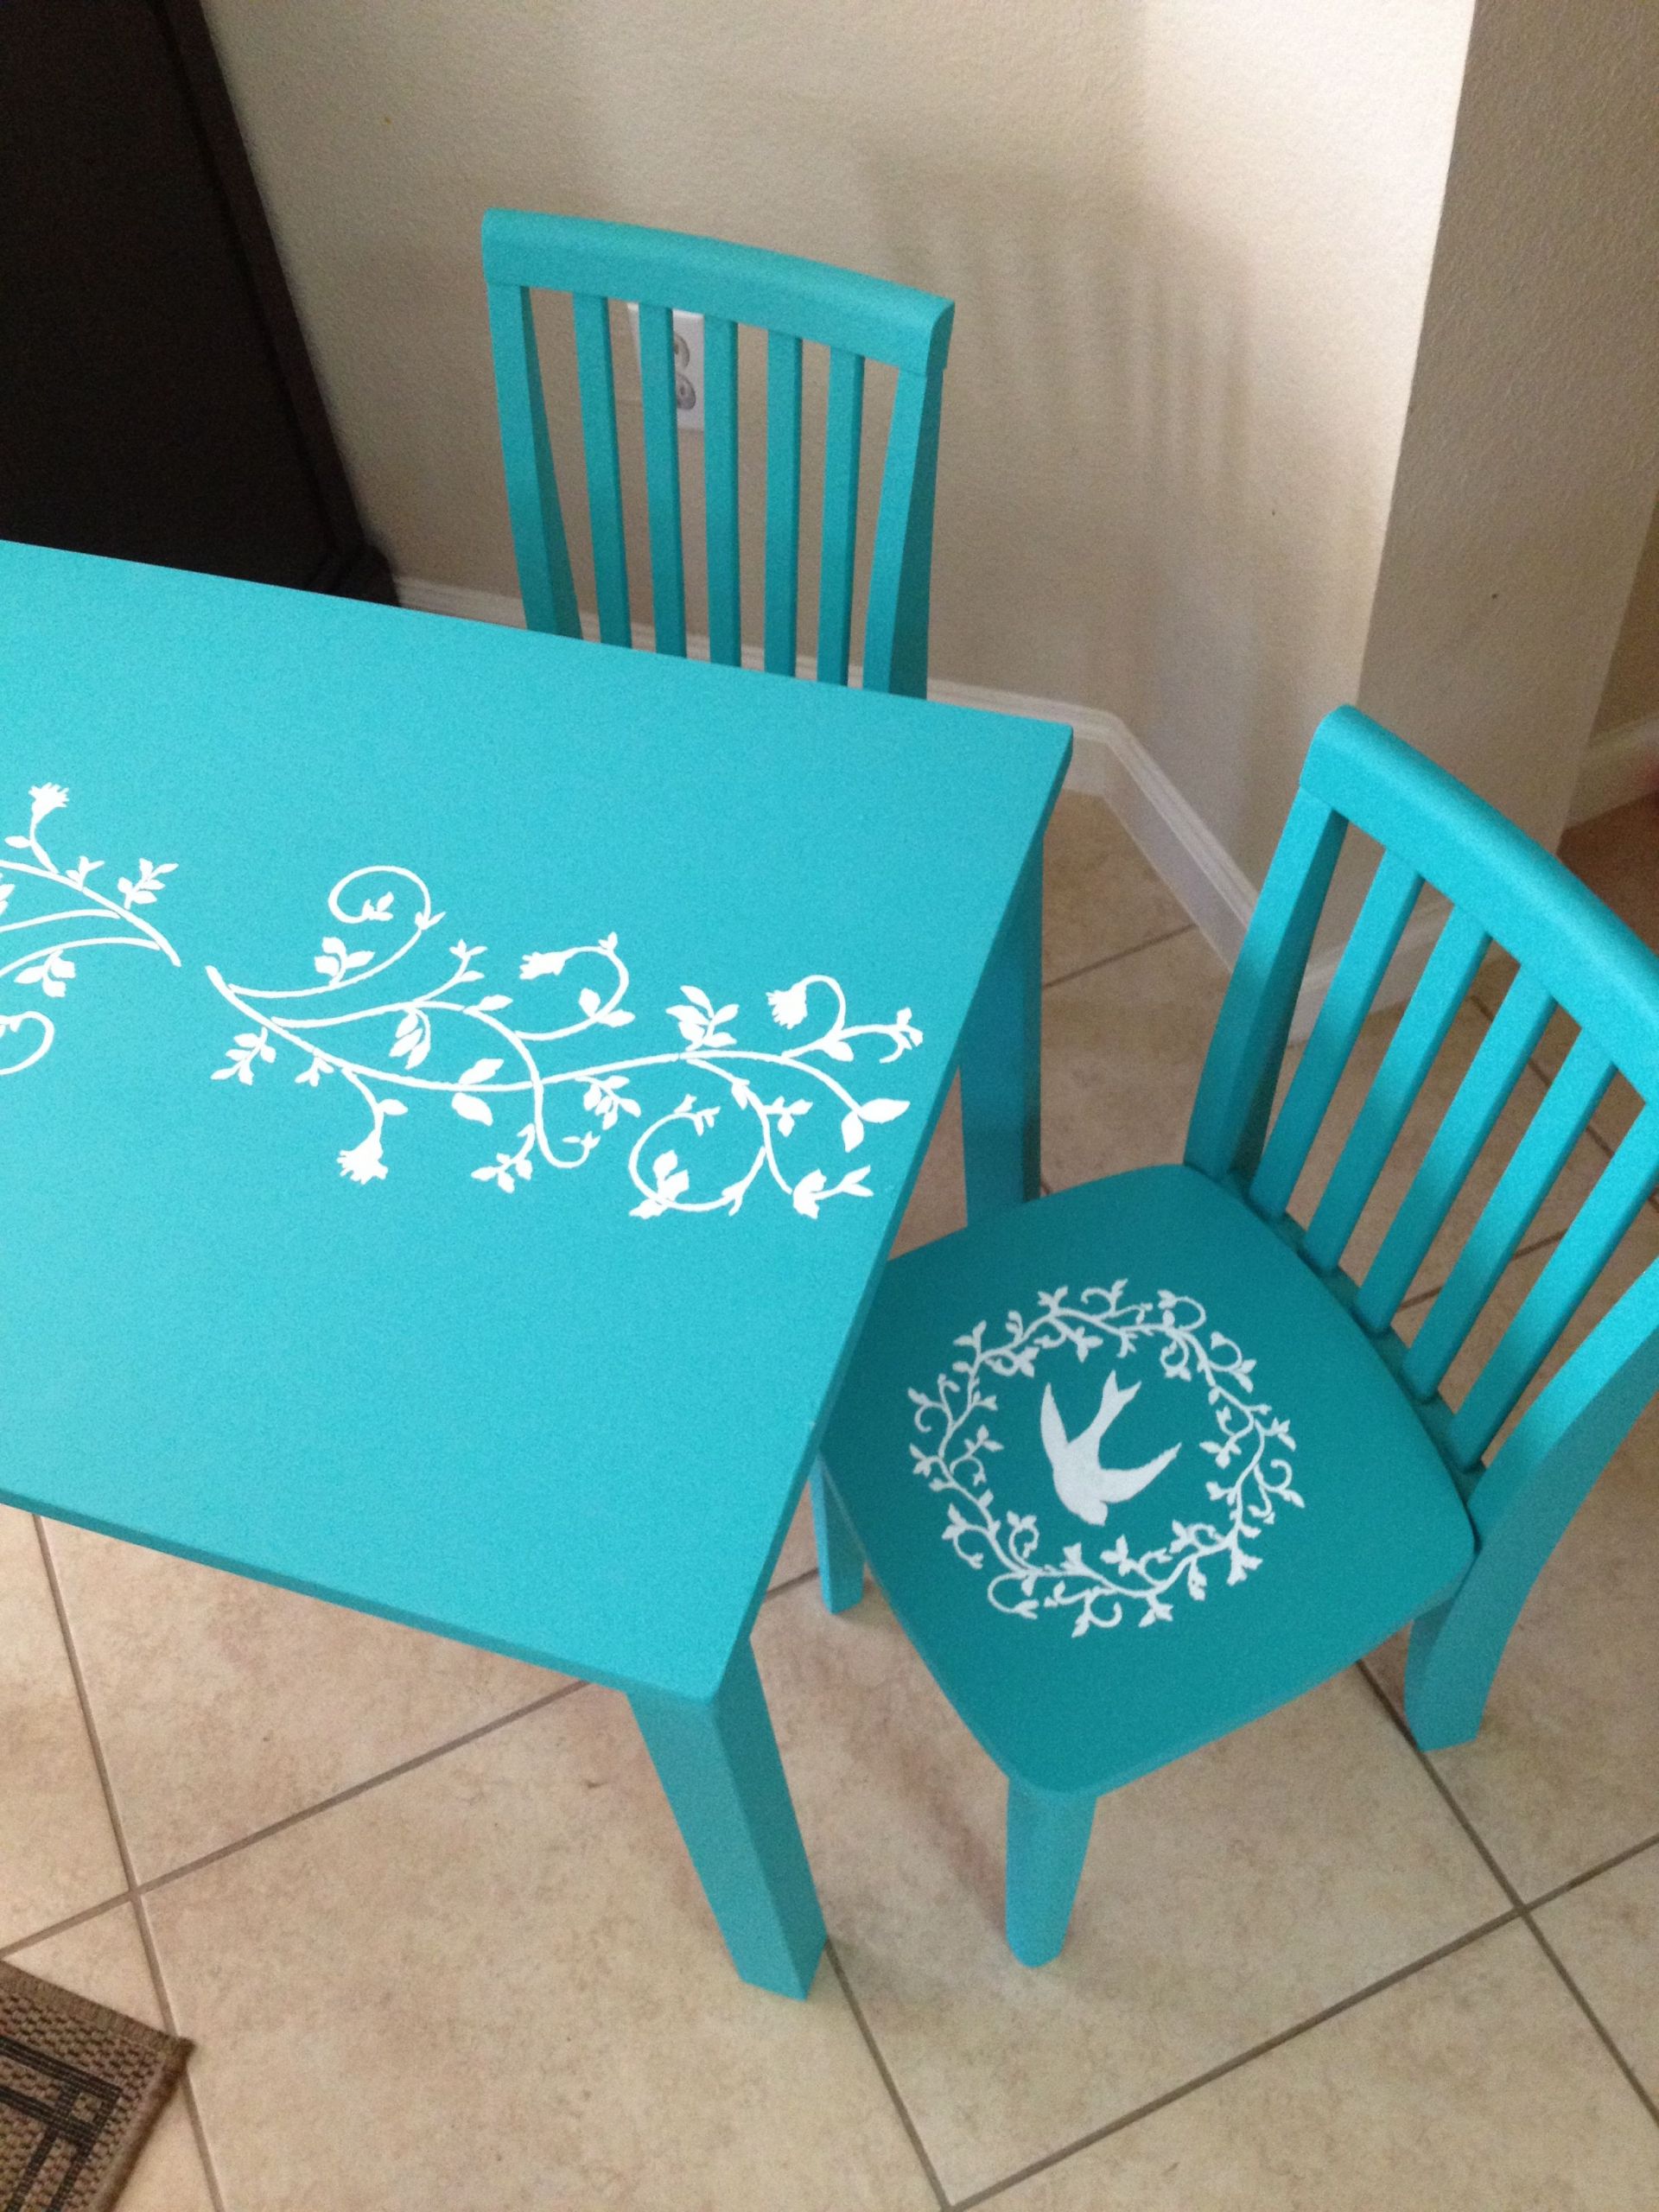 DIY Toddler Table And Chairs
 DIY Chalk Paint Kids Table and chairs